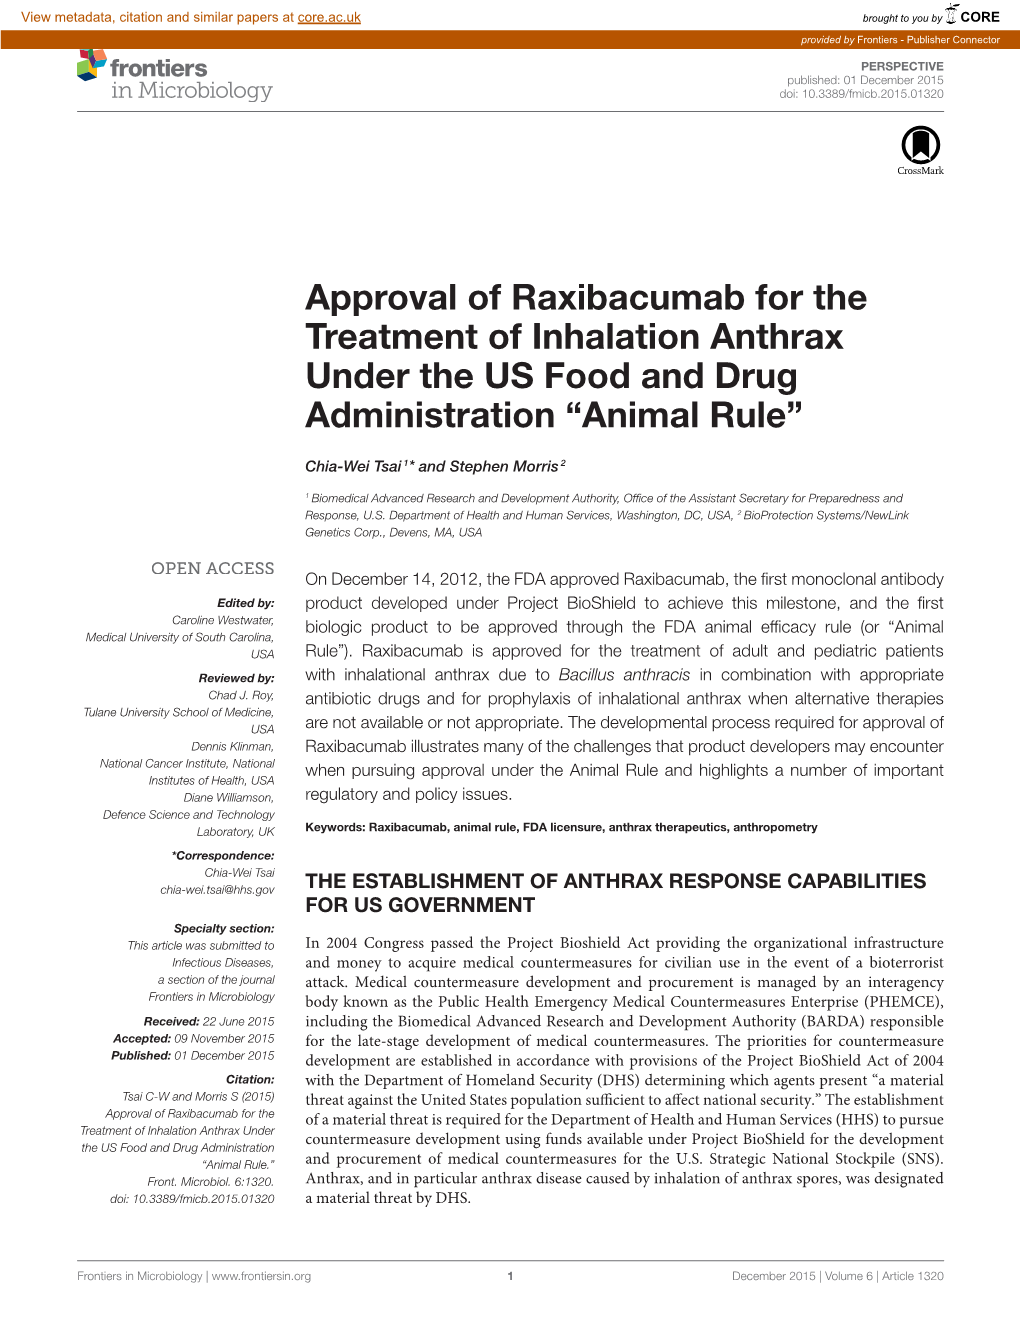 Approval of Raxibacumab for the Treatment of Inhalation Anthrax Under the US Food and Drug Administration “Animal Rule”